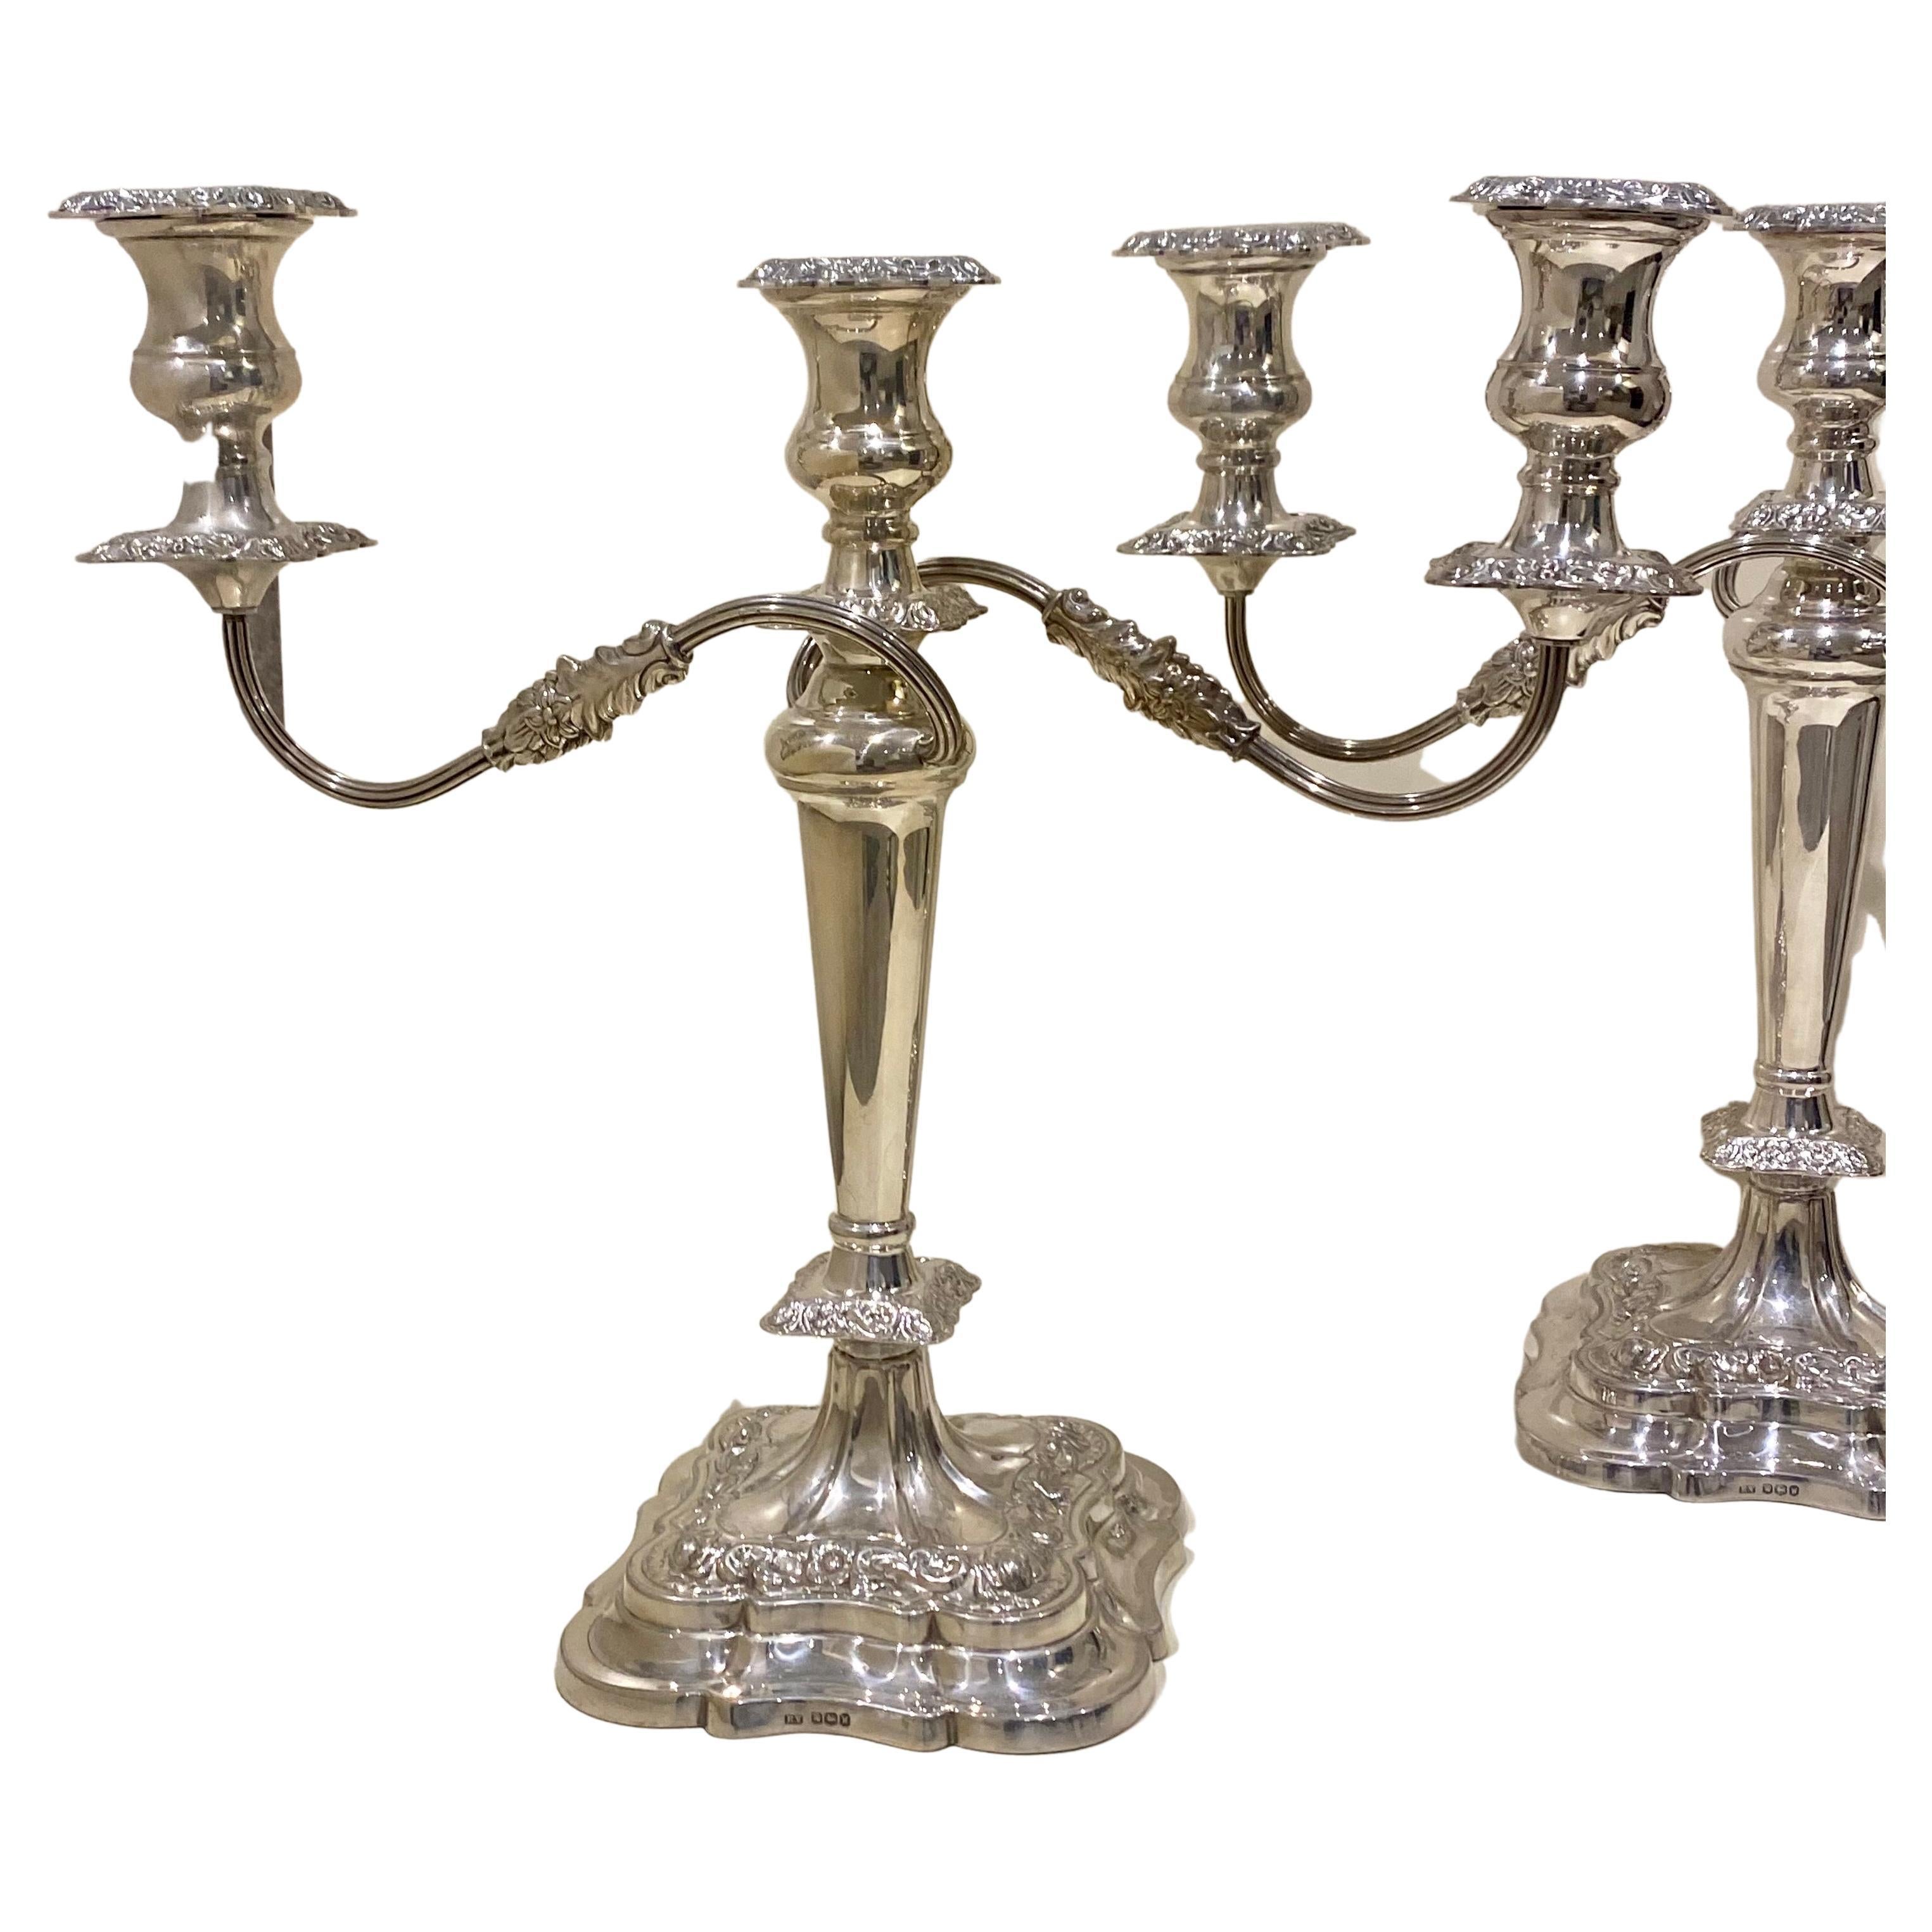 A high quality pair of sterling silver three light, two branch candelabra by highly regarded English silver smiths Emile Viners, Sheffield, circa 1964, 
The vase shape capitals with gadrooned borders and drip pans, two floral and reeded scroll